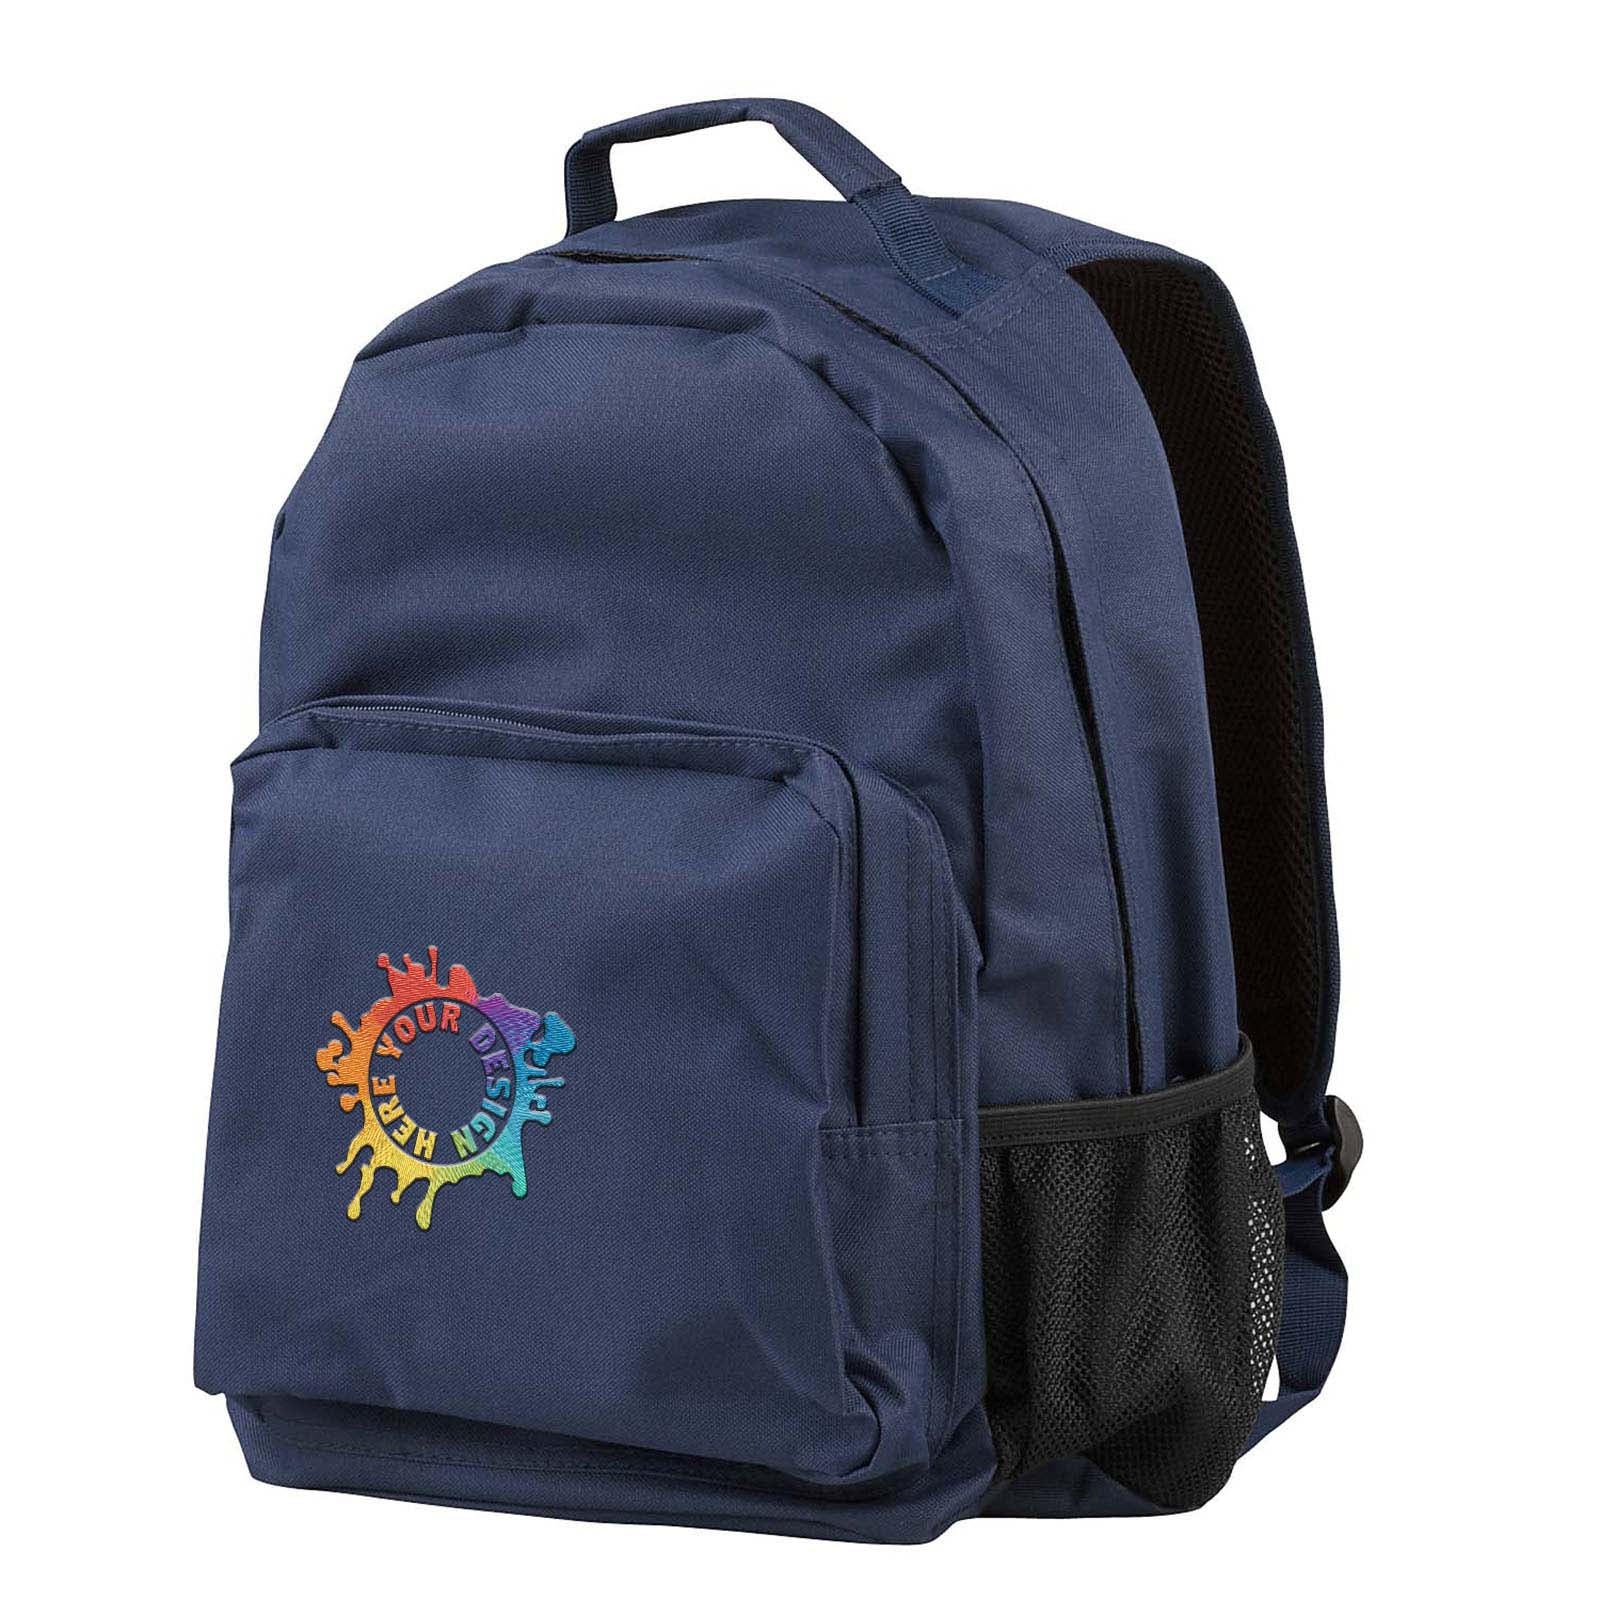 BAGedge Commuter Backpack Embroidery - Mato & Hash